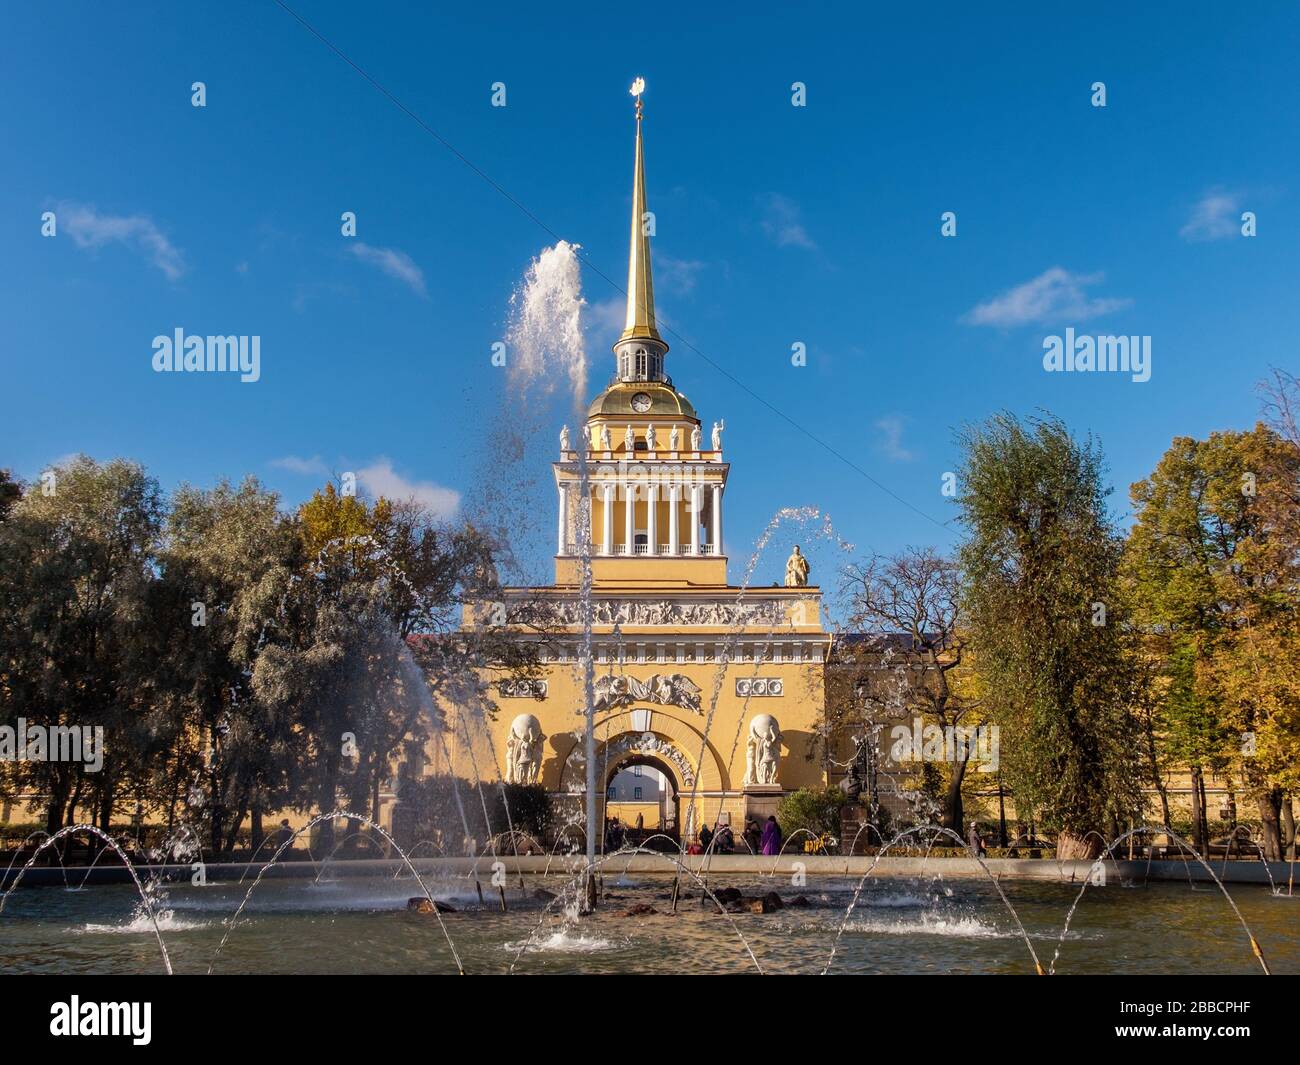 A fountain in the Alexander Garden in front of the wonderful neoclassical Admiralty Building, St Petersburg Russia Stock Photo